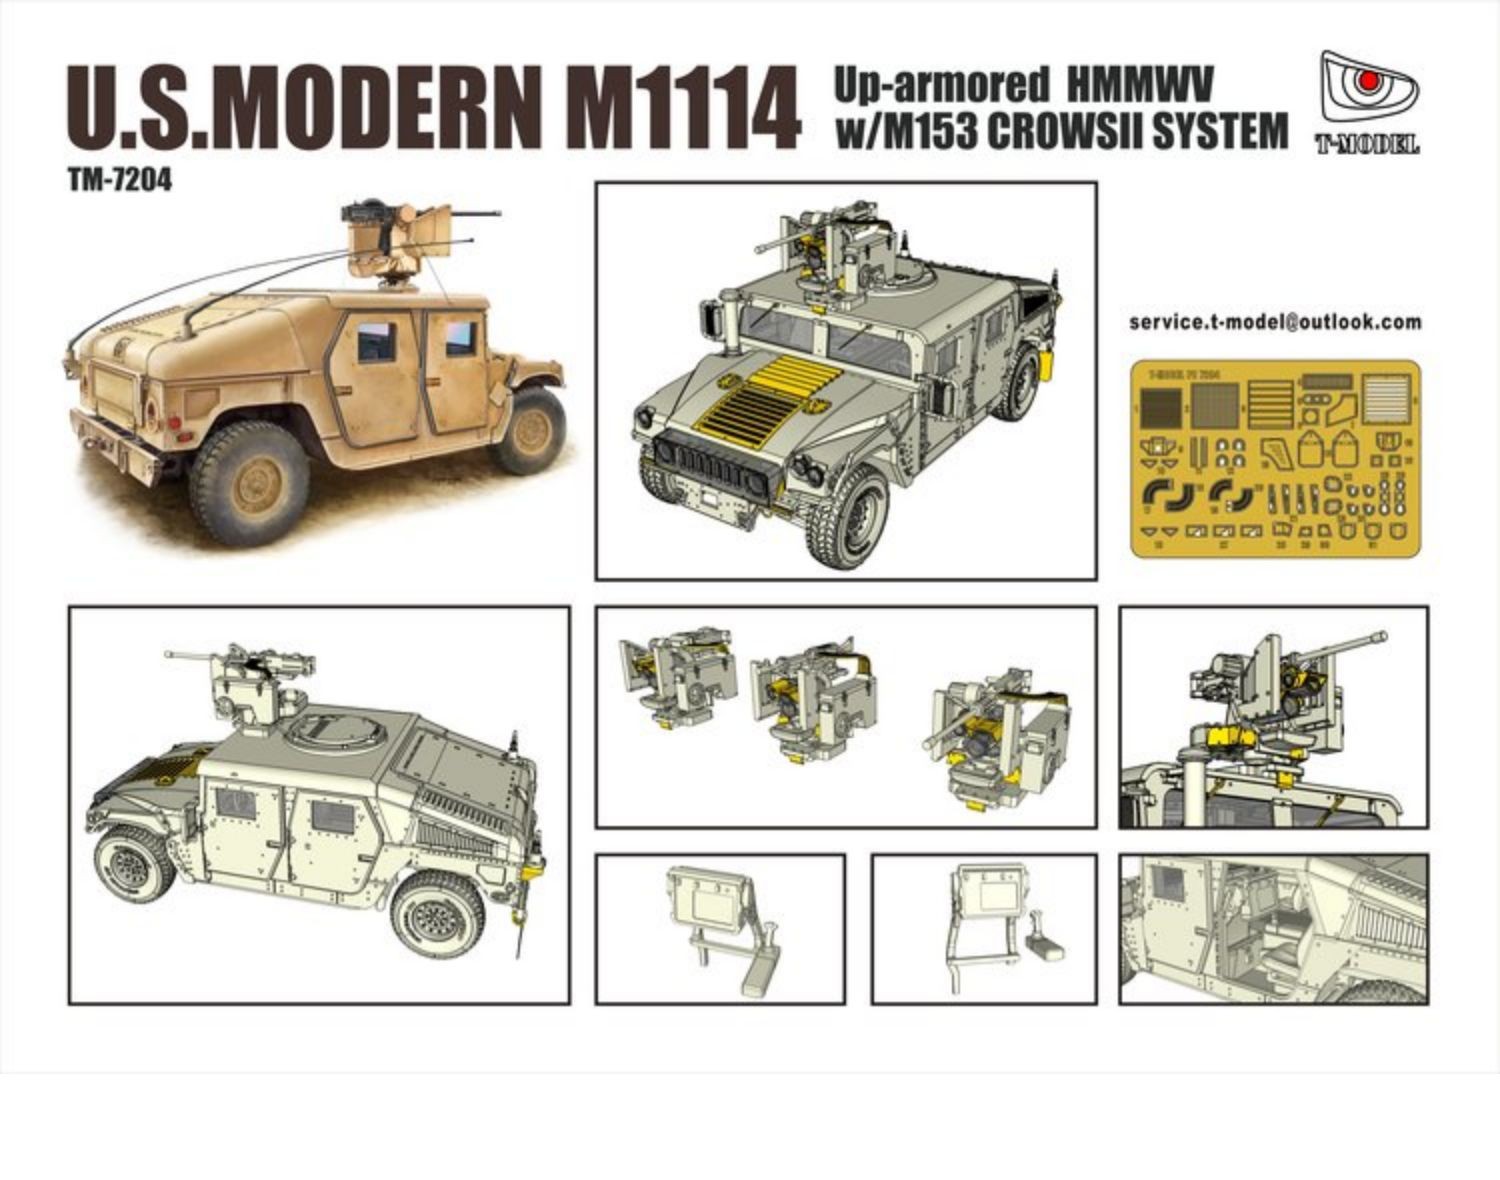 1/72 US M1114 Humvee Up-Armored Tactical Vehicle w/M153 Crows II - Click Image to Close